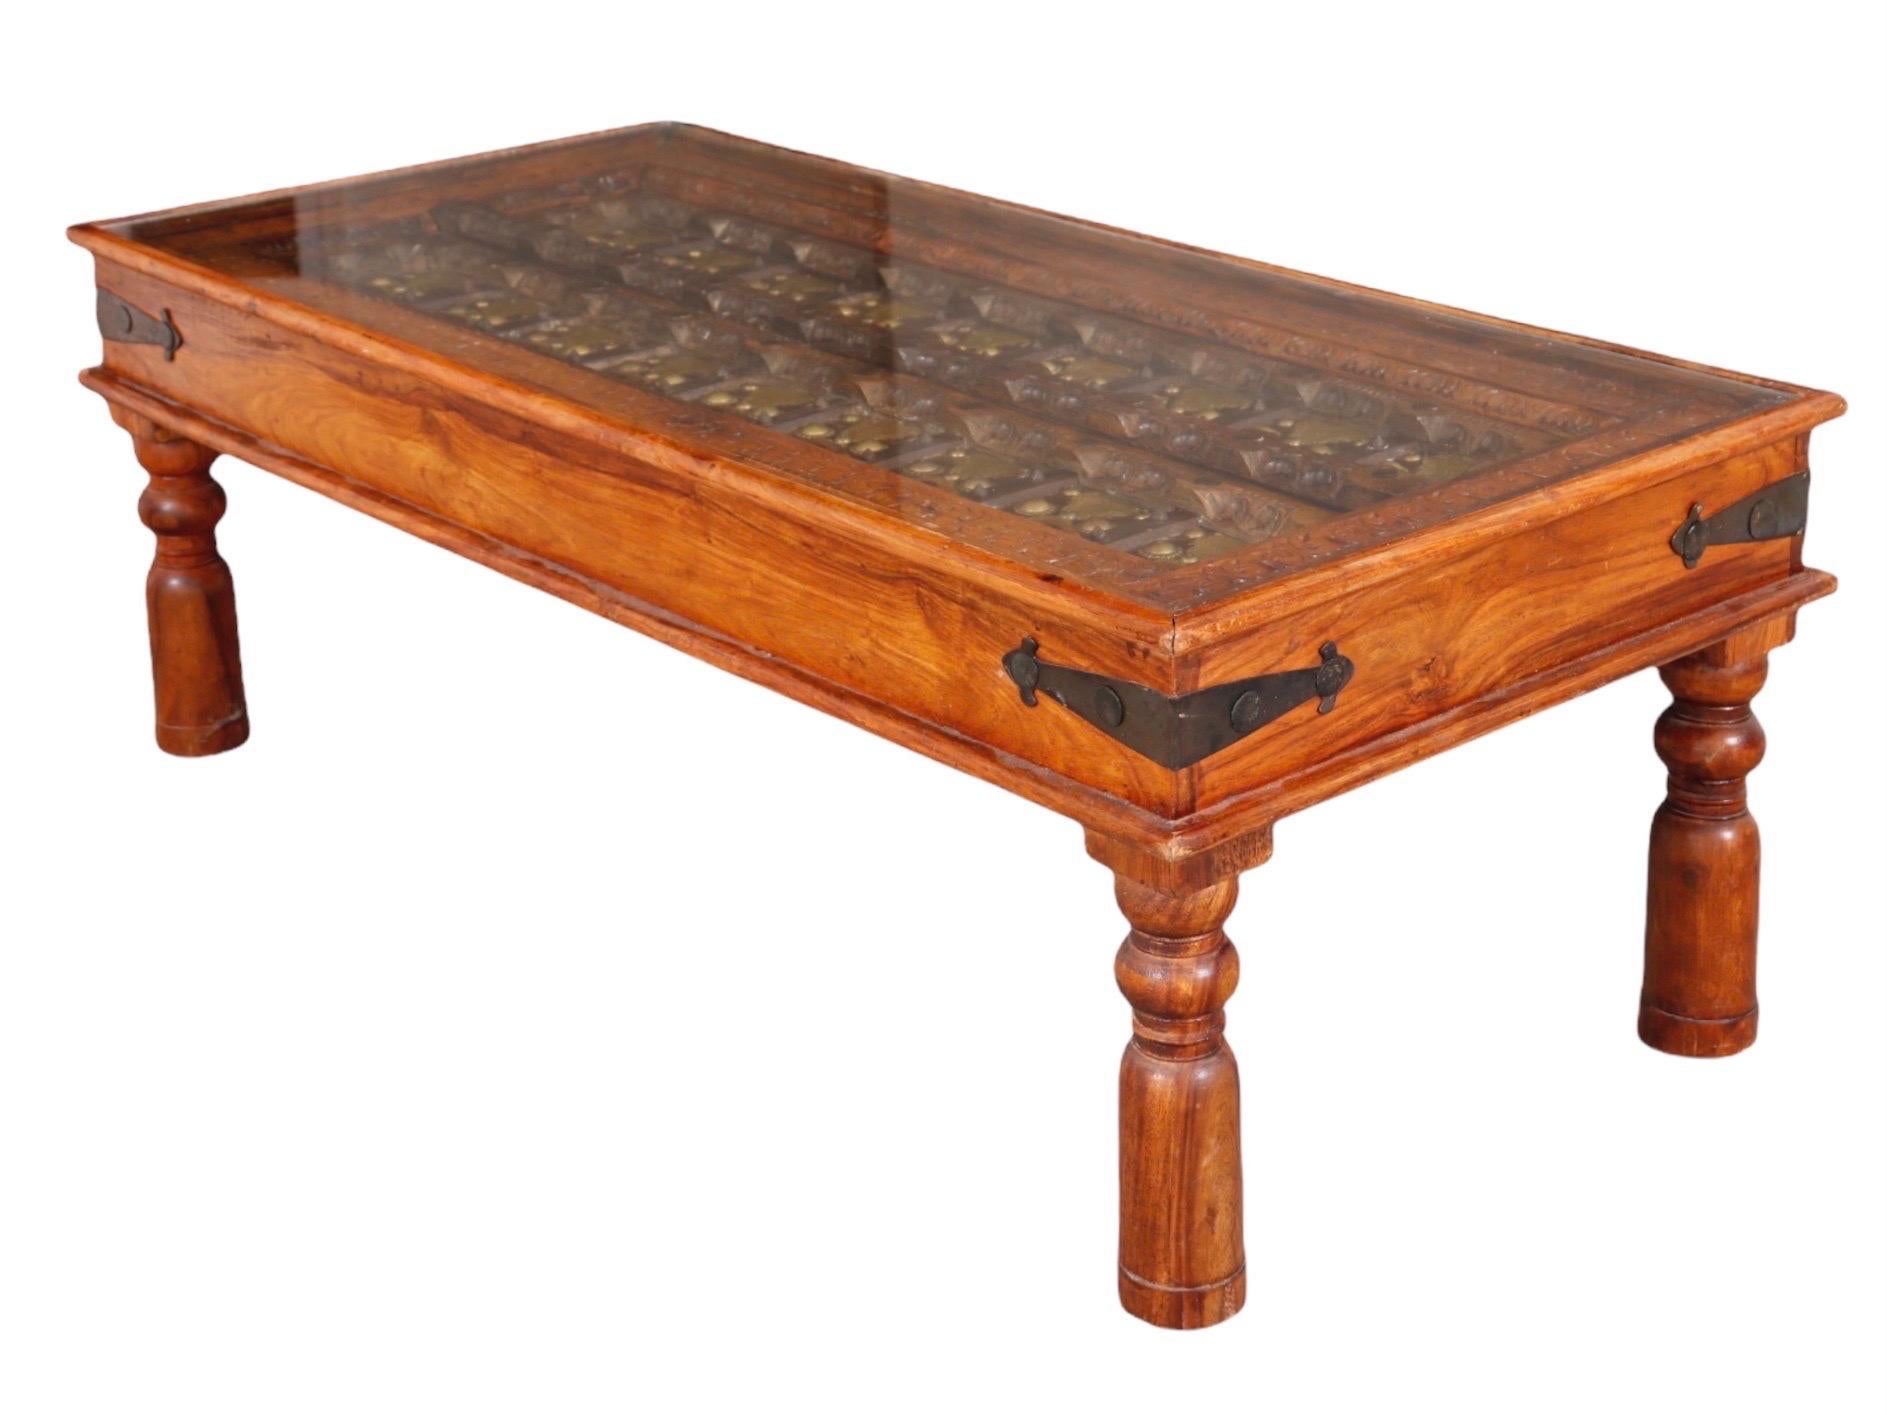 A glass top coffee table made with an antique Indian embellished sheesham wooden door. Dating from the late 19th century, the door panel consists of elaborately carved sheesham wood decorated with brass and iron studded bands. Framed in knotty pine,